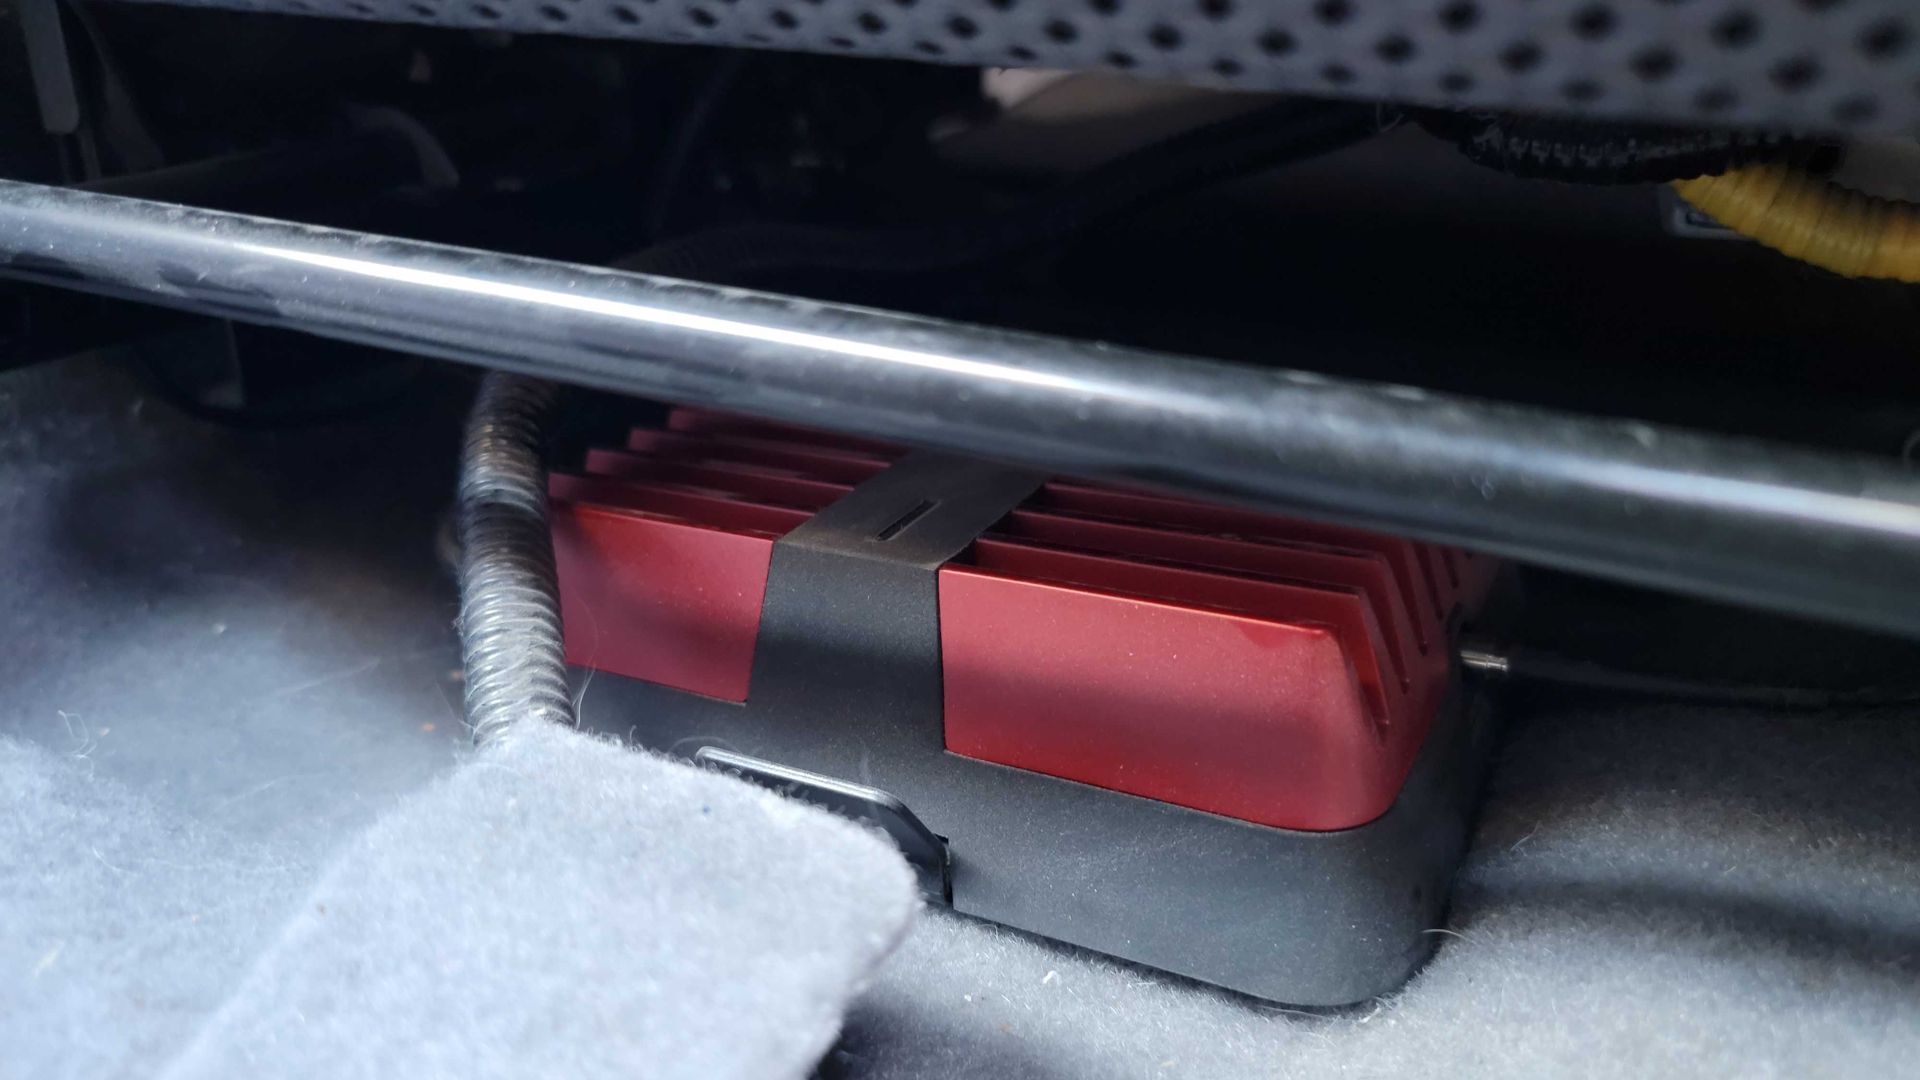 Weboost mounted under a car seat.